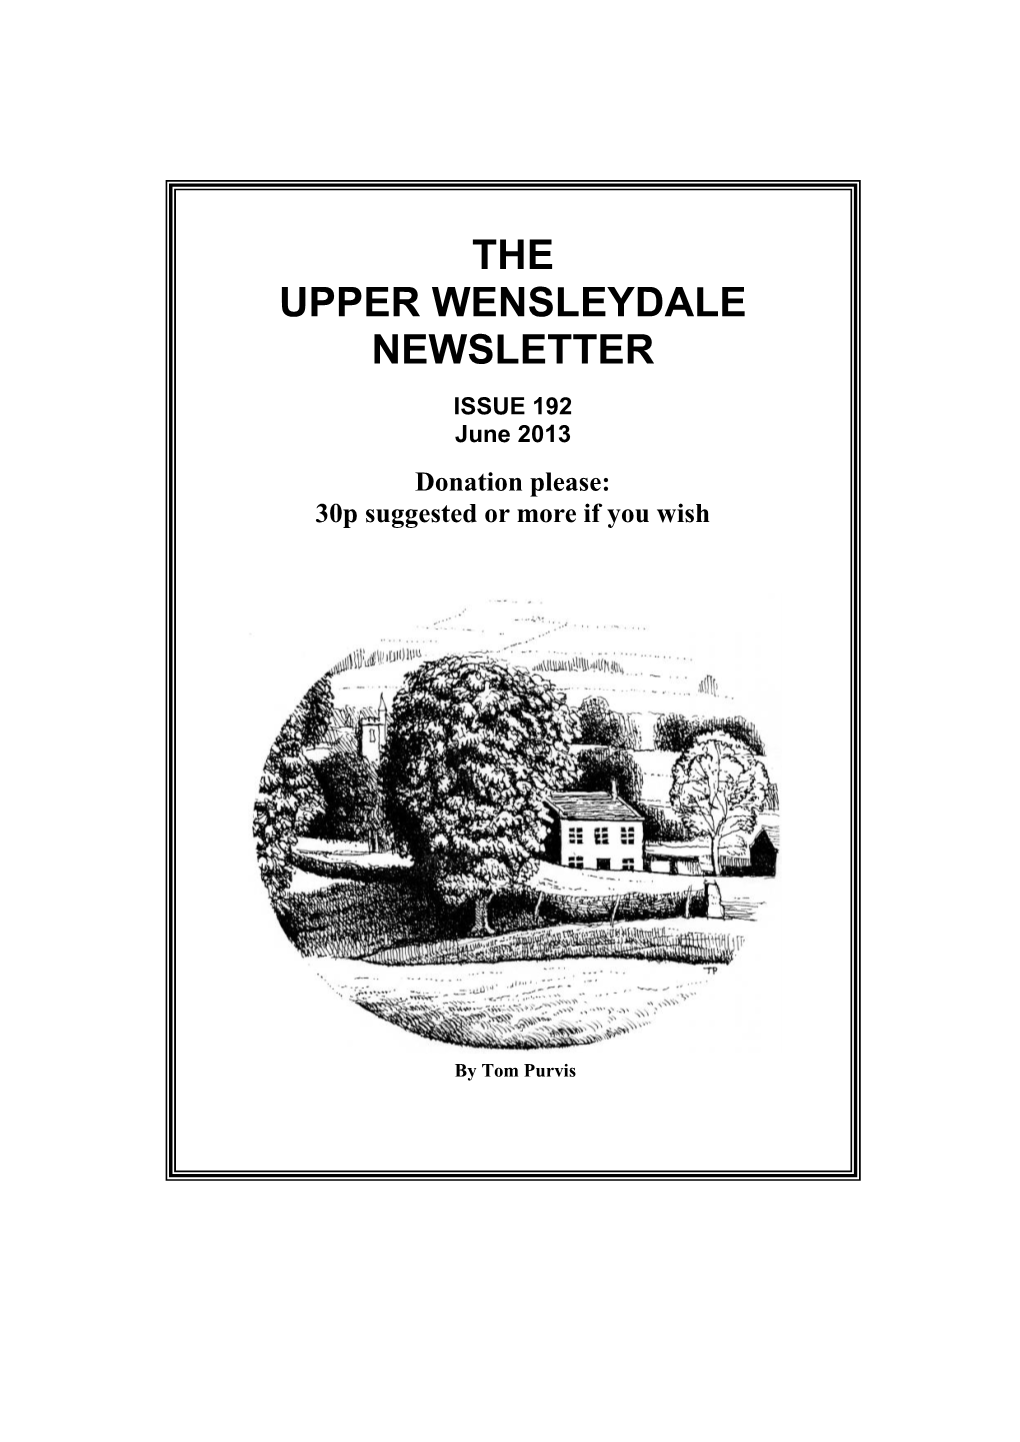 THE UPPER WENSLEYDALE NEWSLETTER ISSUE 192 June 2013 Donation Please: 30P Suggested Or More If You Wish